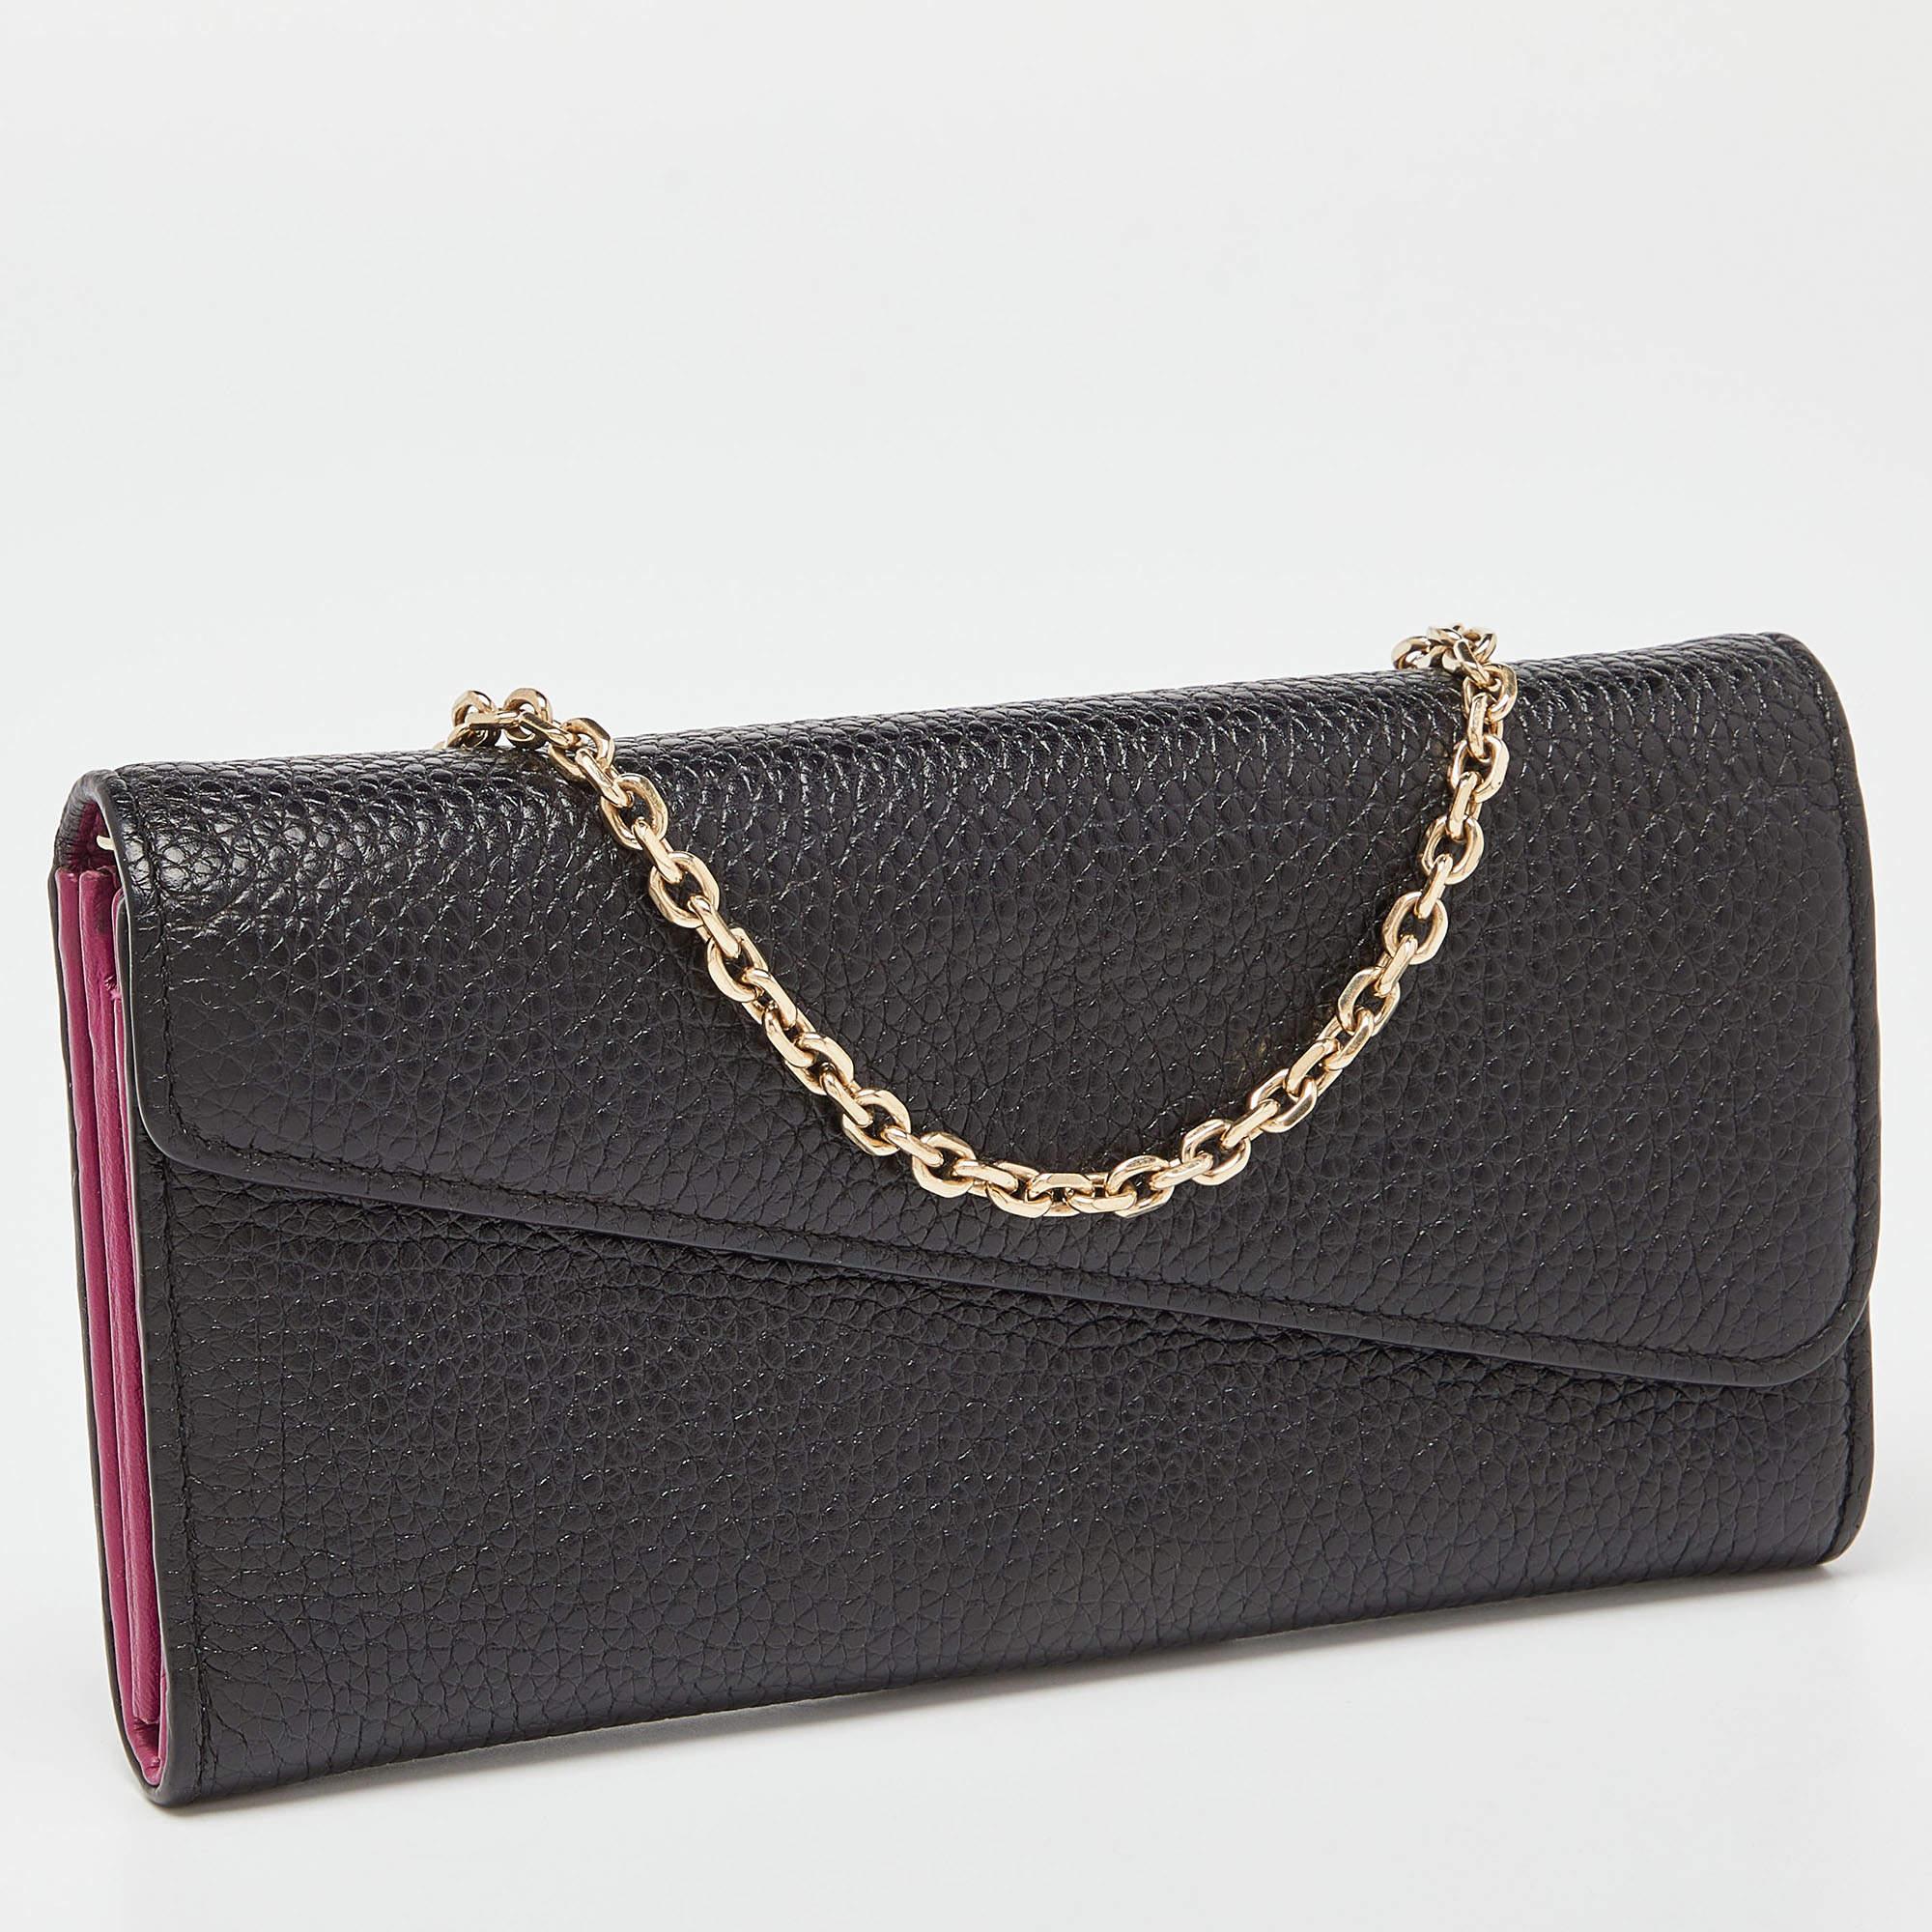 This Dior chain wallet has been beautifully crafted using black/pink leather. It has a flap closure and a chain handle.

